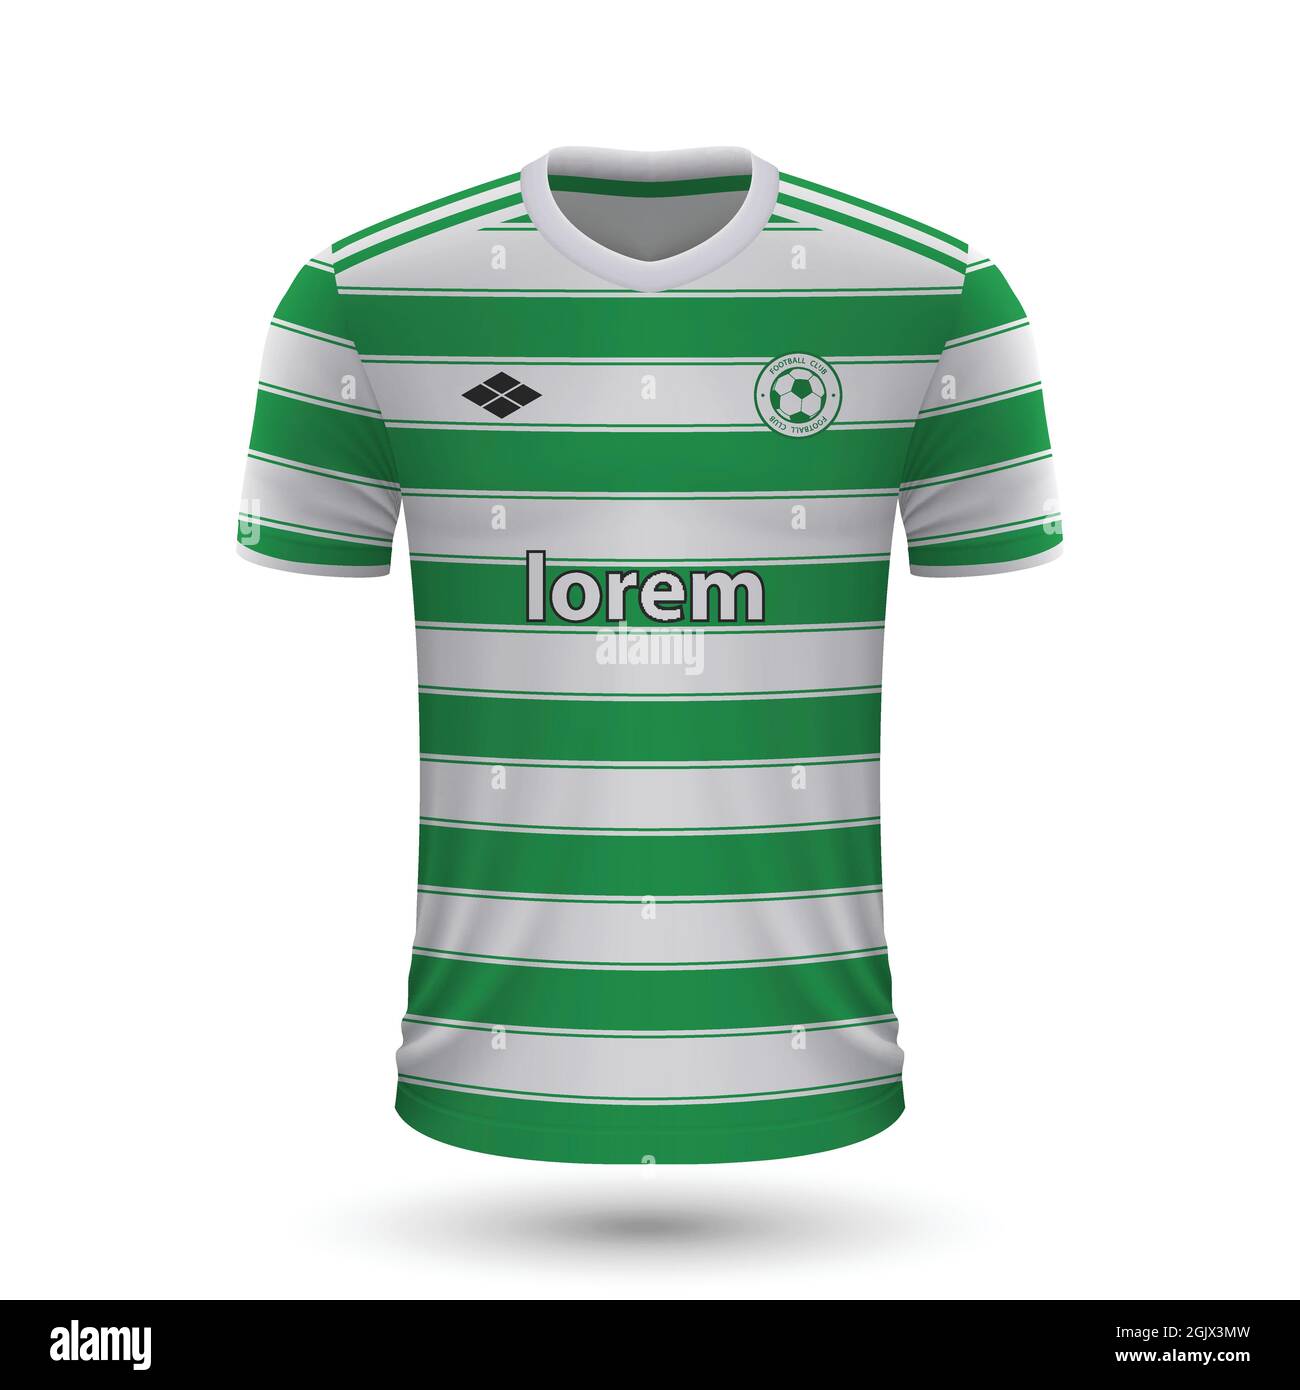 Home of celtic football club Cut Out Stock Images & Pictures - Alamy